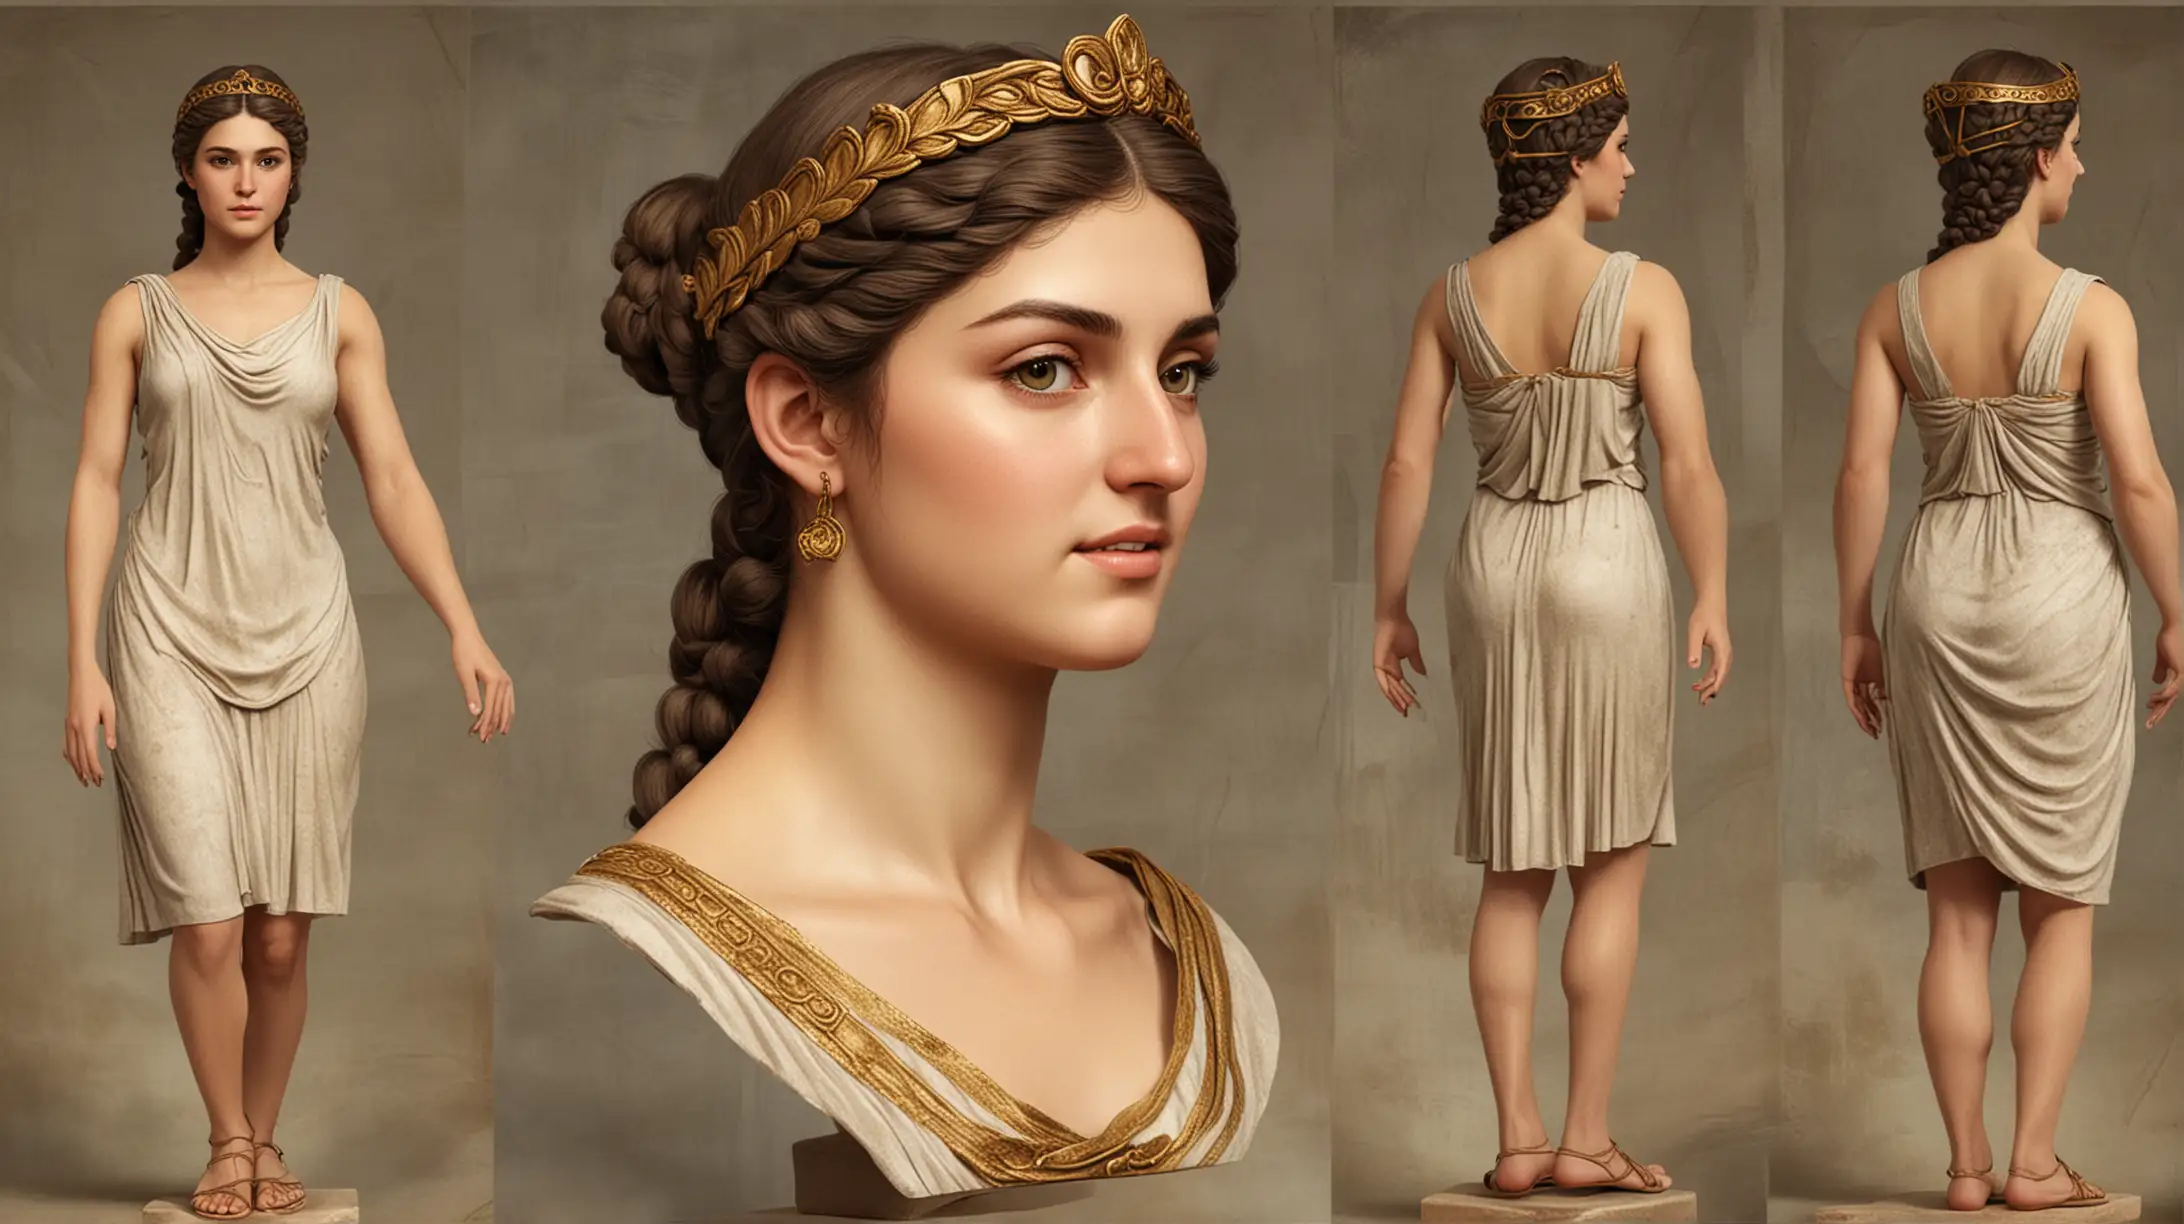 Portrait of a Noble Young Woman in Ancient Greek Attire